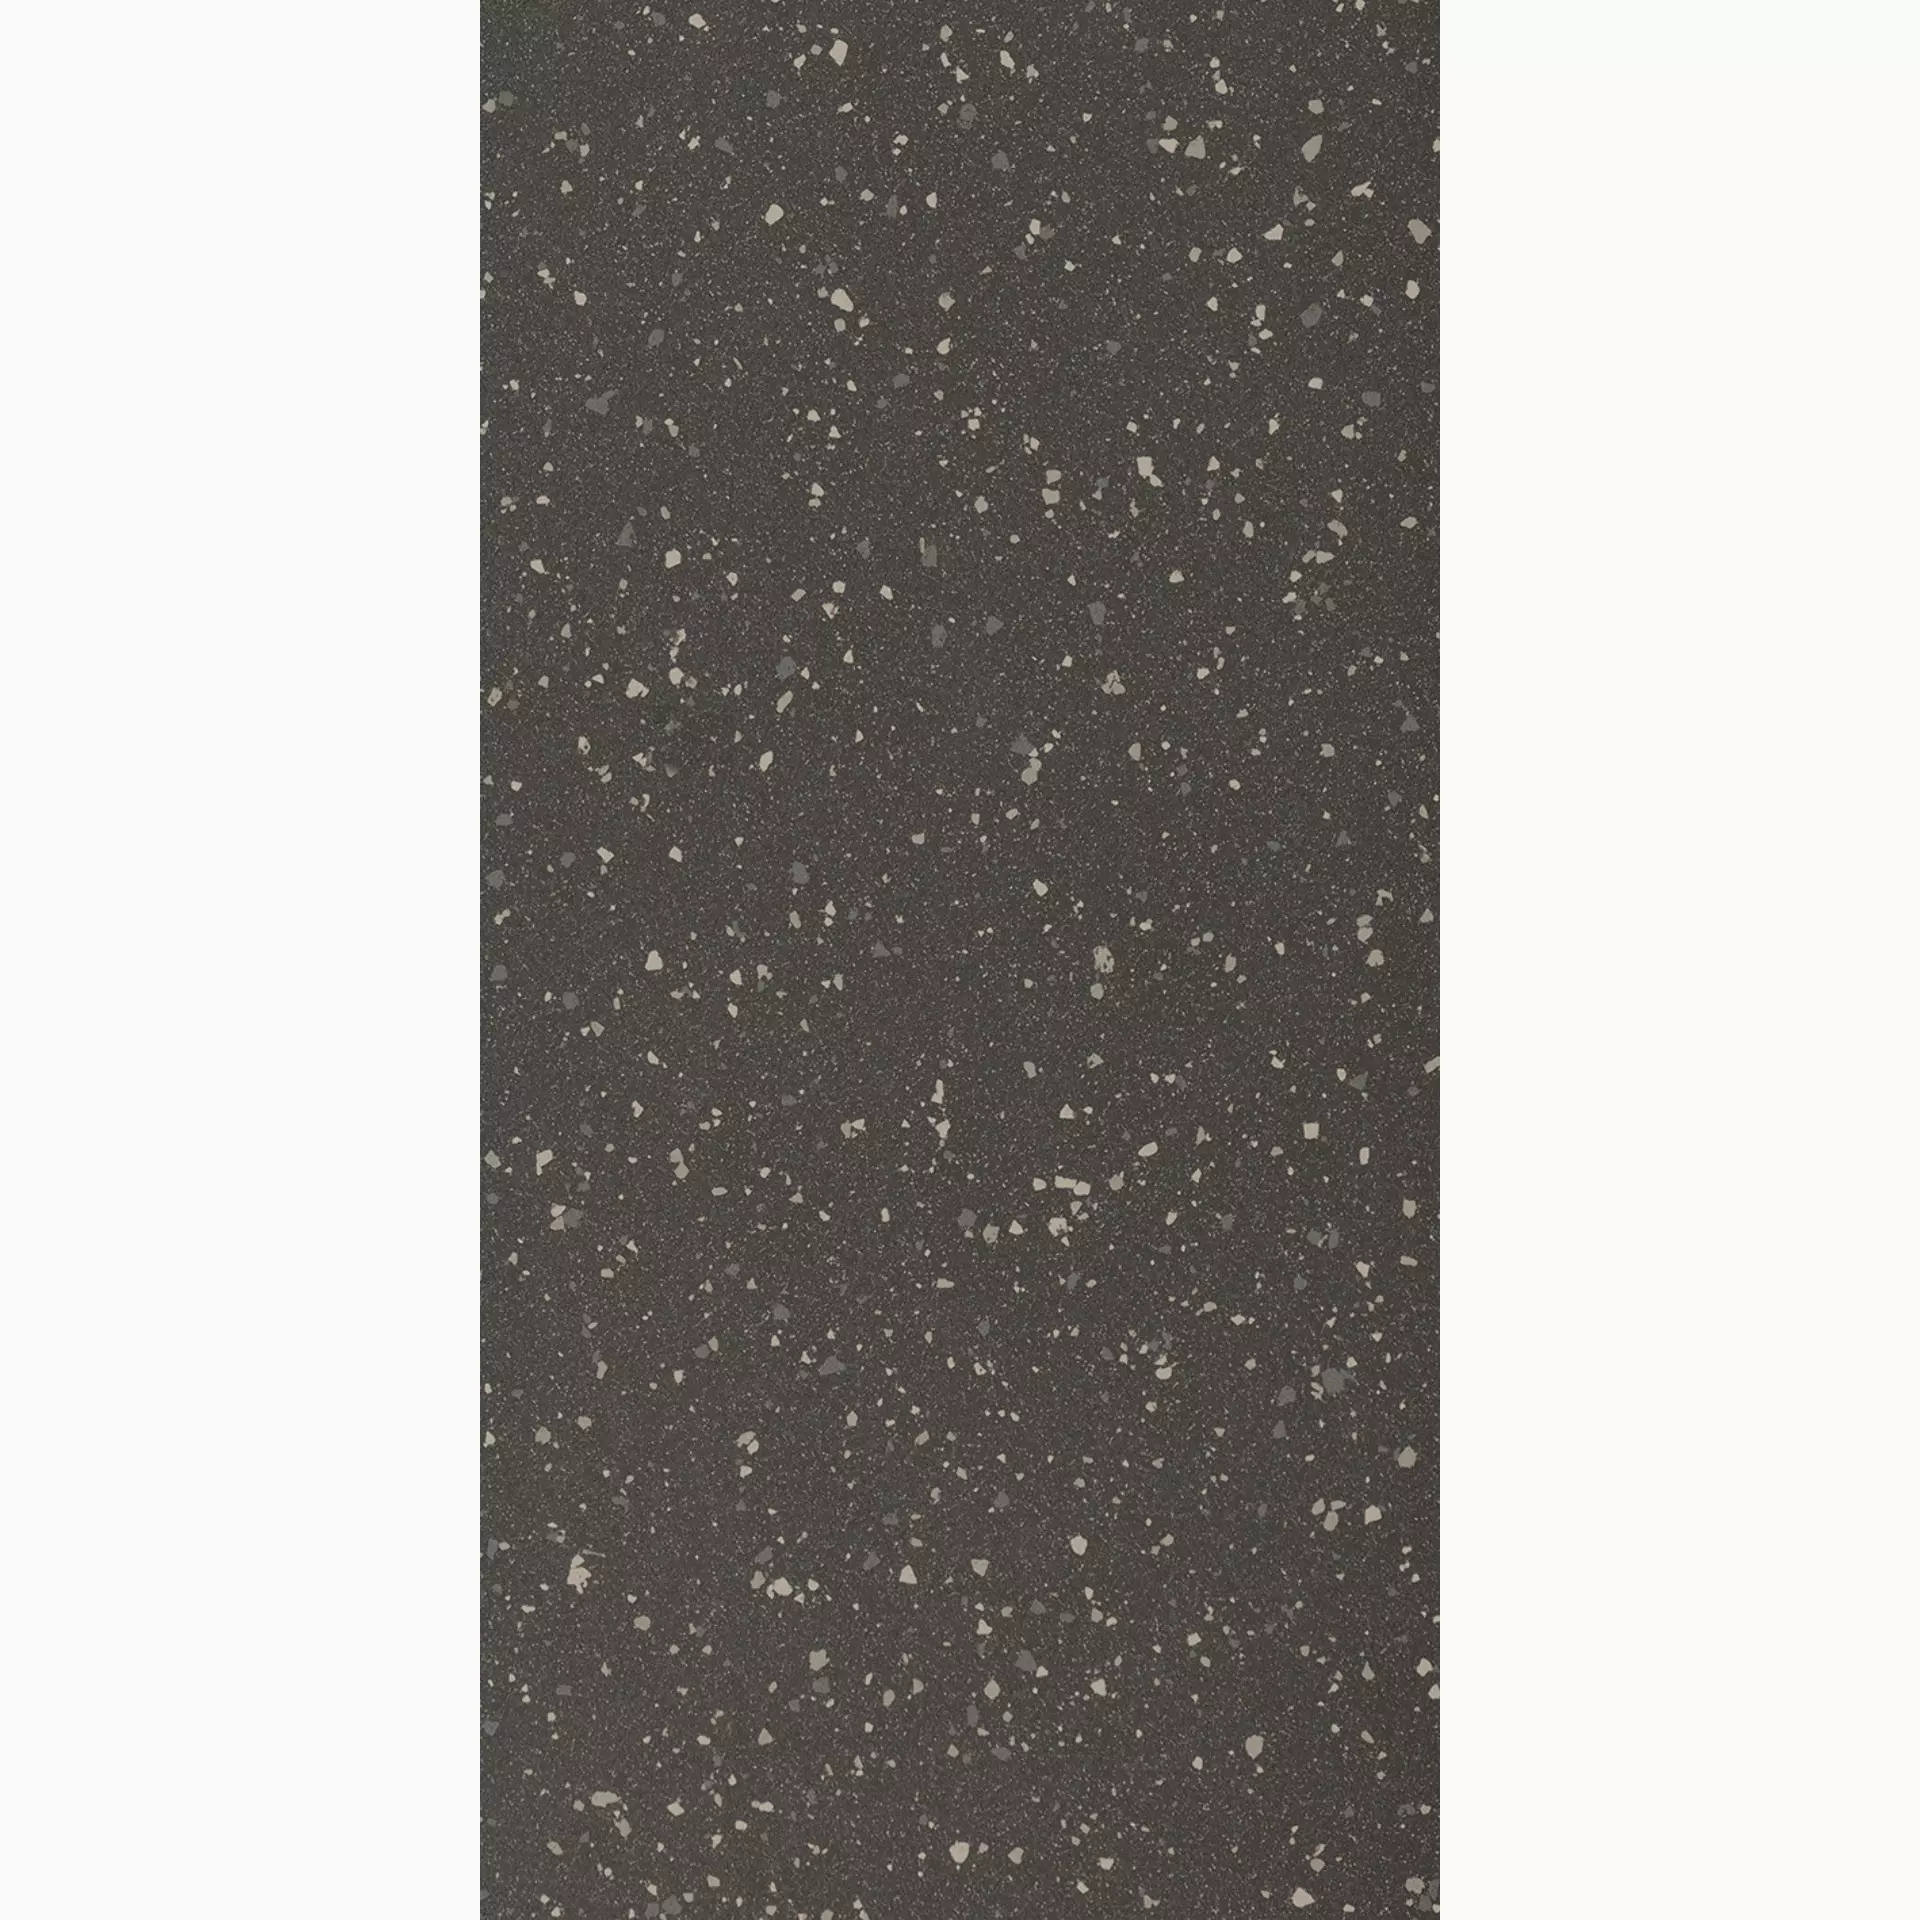 Florim Earthtech Carbon_Flakes Glossy - Bright 776952 60x120cm rectified 9mm